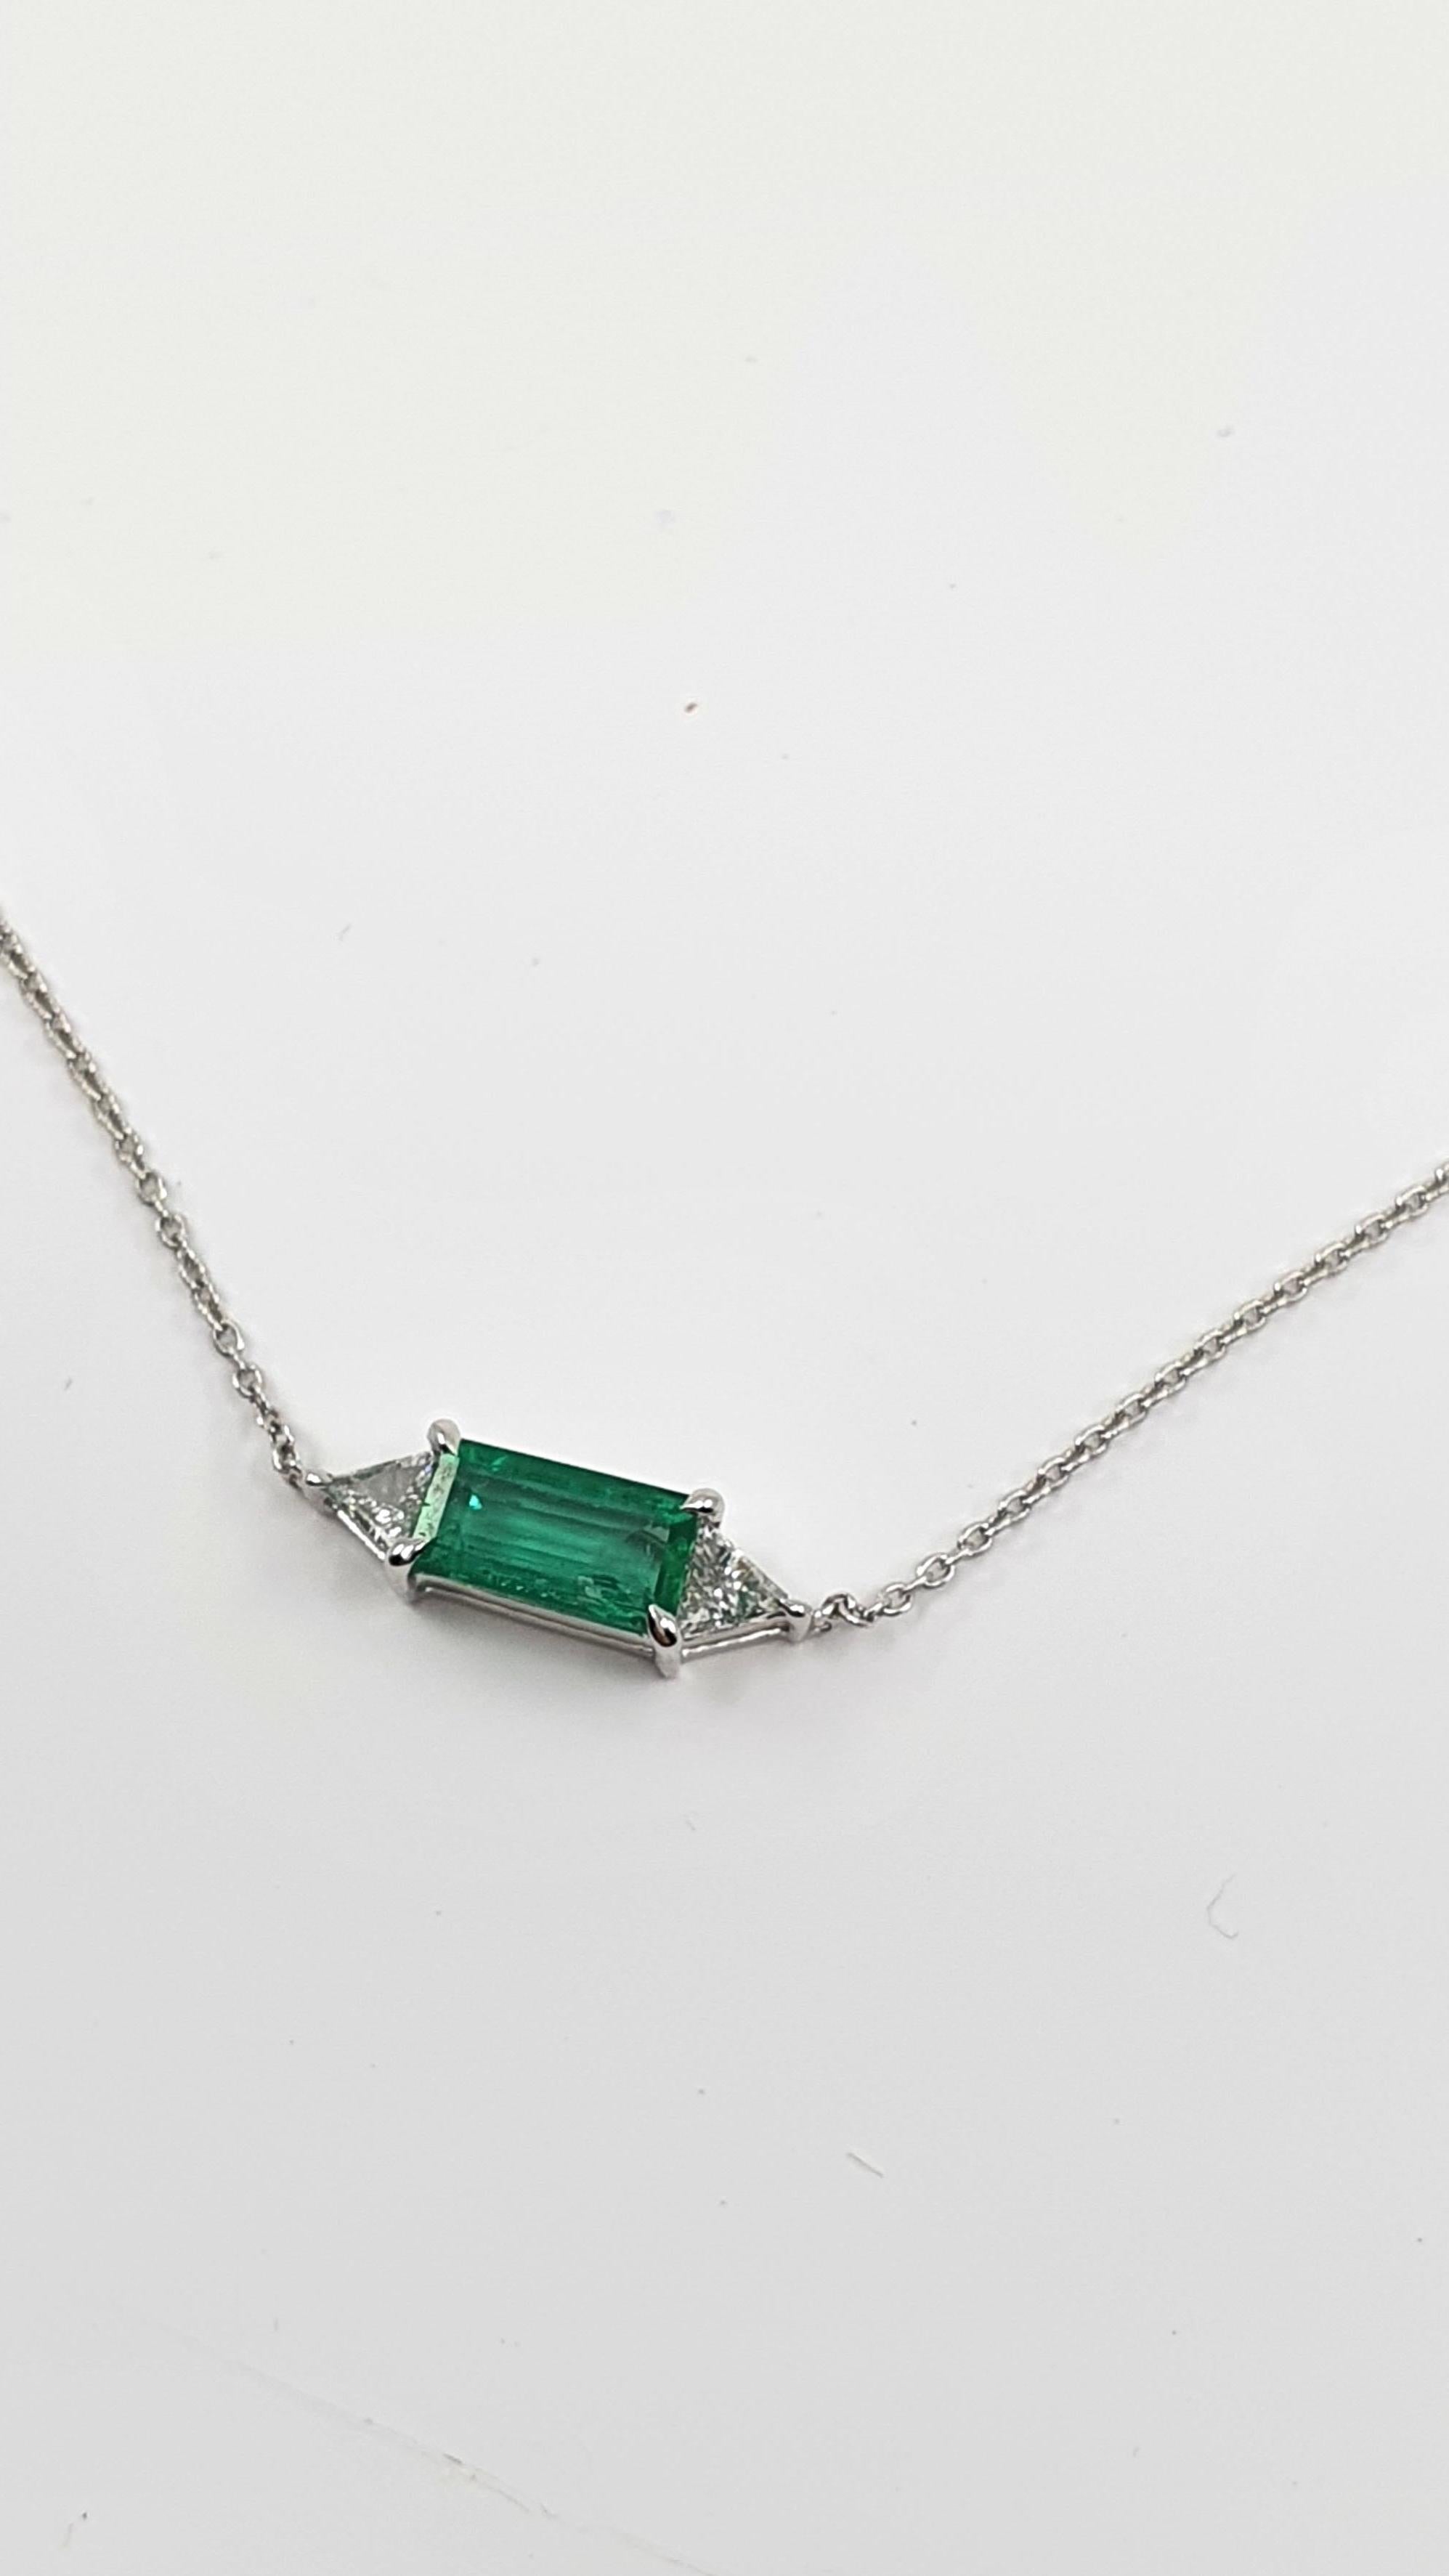 This necklace is where the iconic Art Deco meets contemporary jewelry. This elegant 18 K white gold chain necklace features a gorgeous rectangular clear bright emerald. The Art Deco elements of the jewelry are depicted in the symmetric accurate